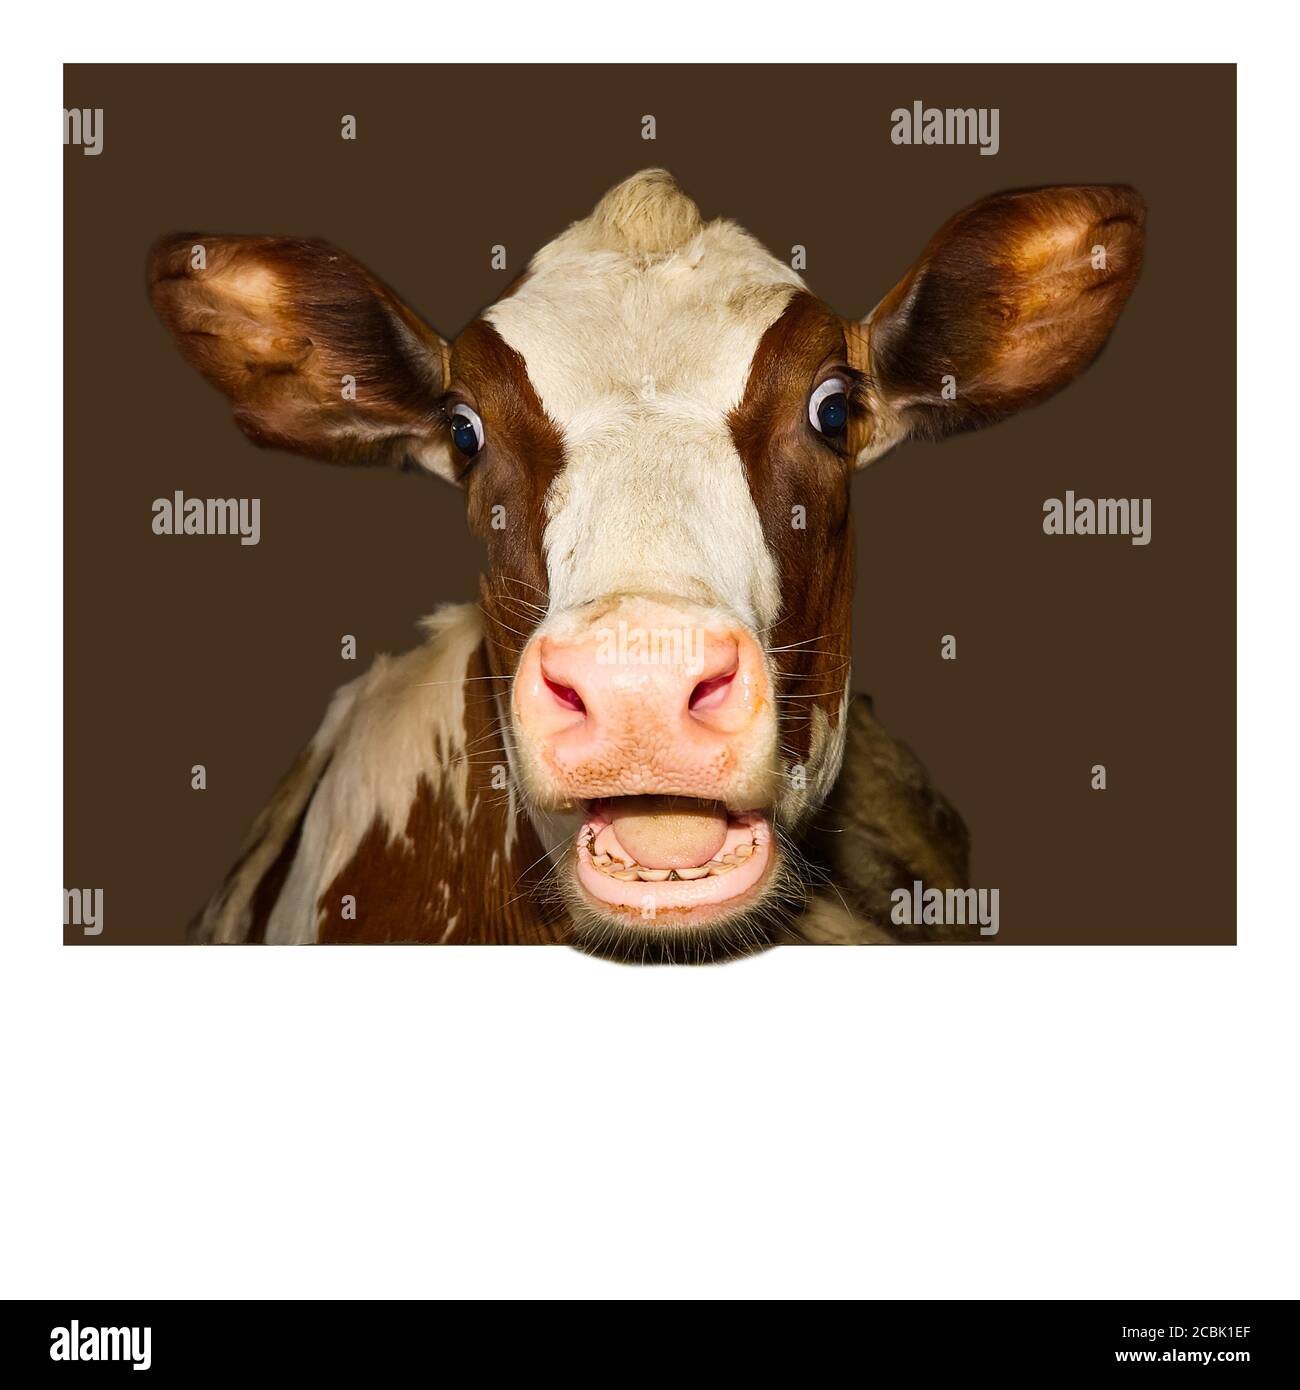 Funny and happy cute baby calf, funny photo great for use with wow memes. Funny shootof wondering orange calf in farm. Stock Photo